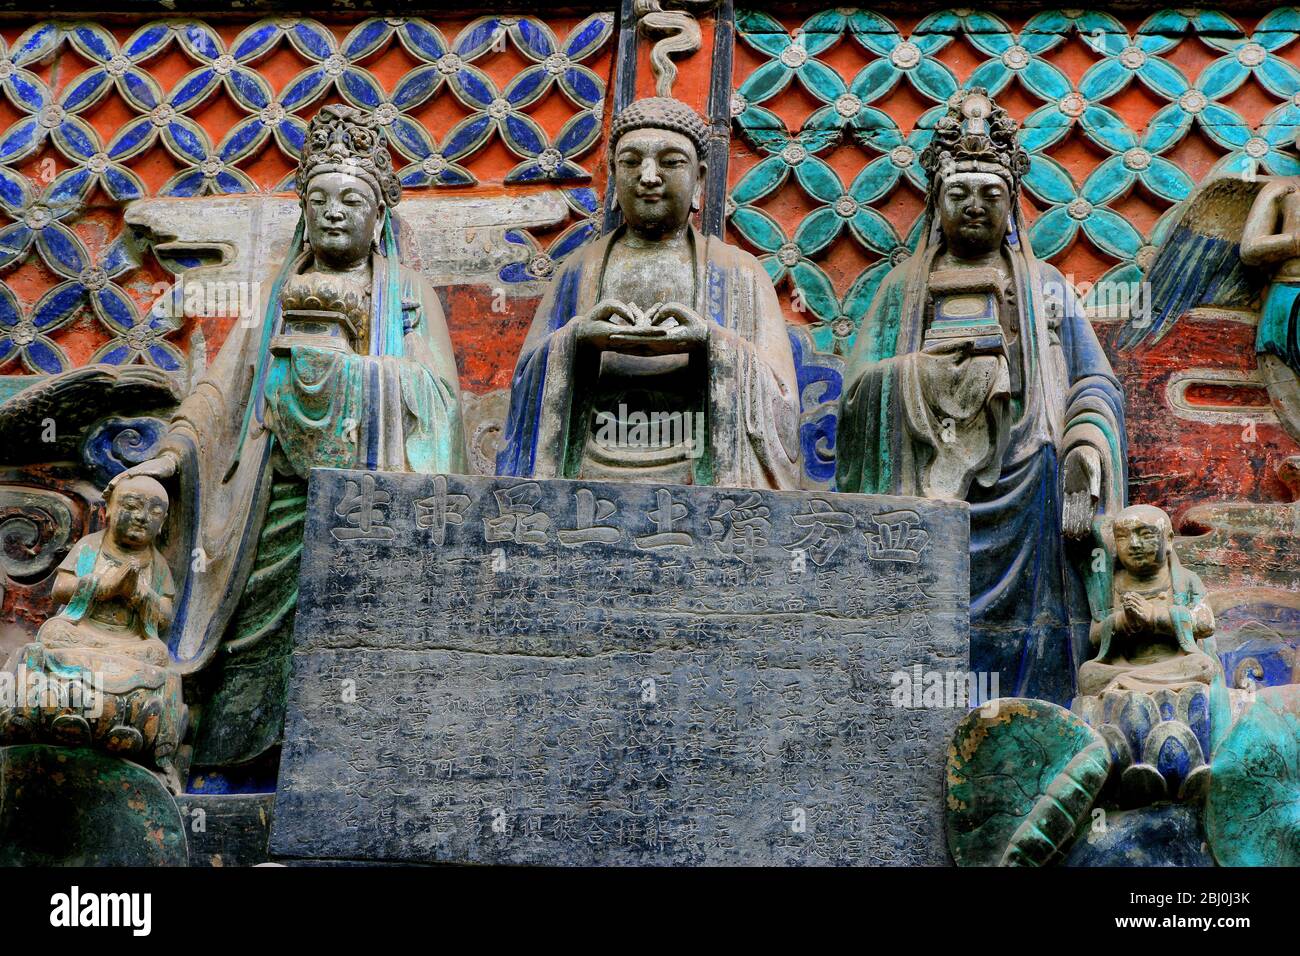 Look at the top middle class statue (Southern Song Dynasty) in theThree Pins and Nine Thousands of Life picture in disguised form of Wuliangshou Buddh Stock Photo